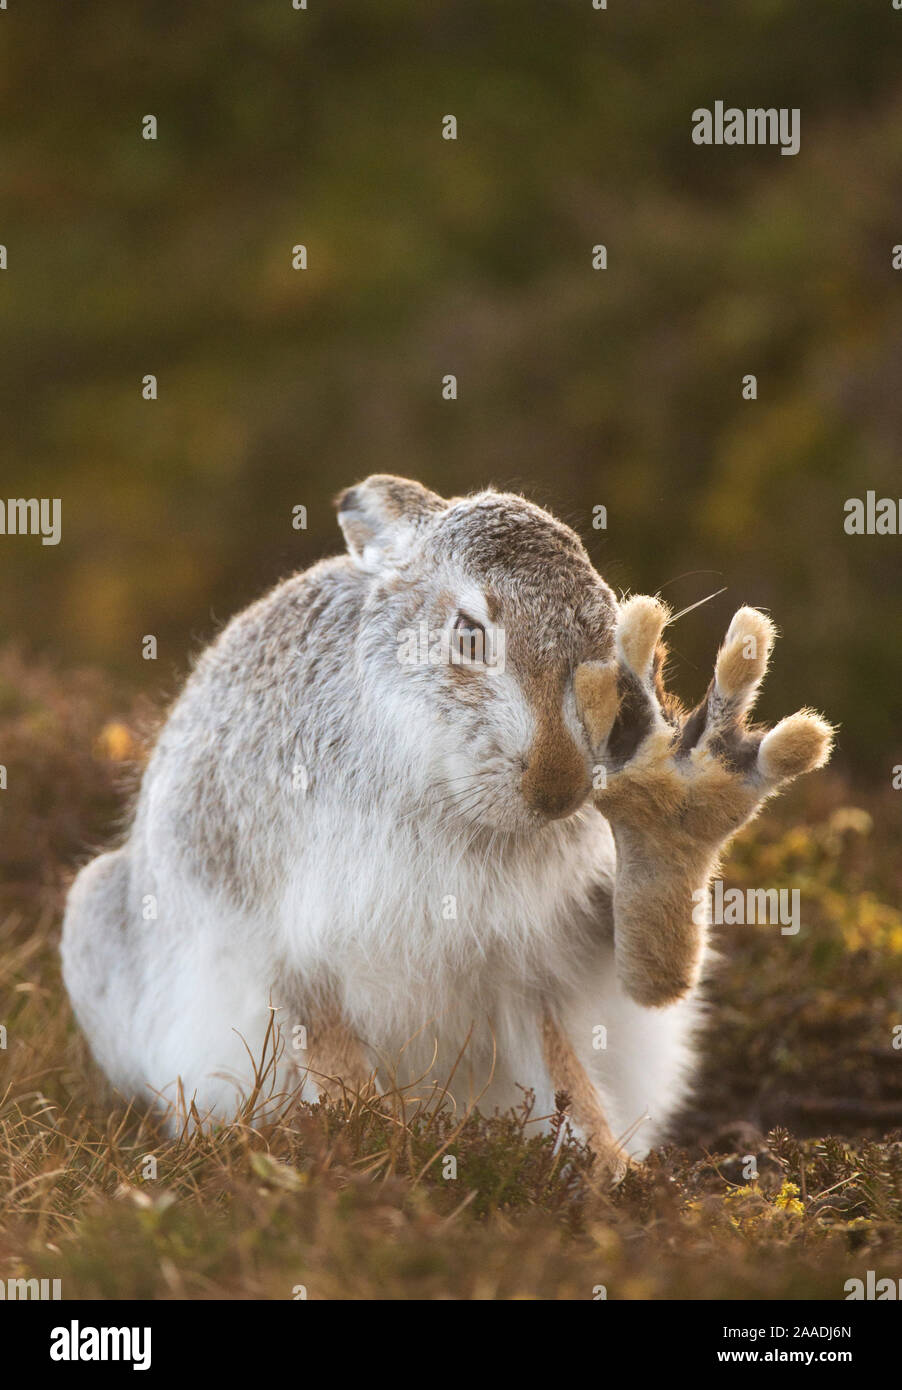 Mountain hare (Lepus timidus) grooming itself, with back foot raised, Cairngorms National Park, Scotland, UK, February.  Highly Commended in the Animal Behaviour category of the British Wildlife Photography Awards (BWPA)Competition   2017. Stock Photo